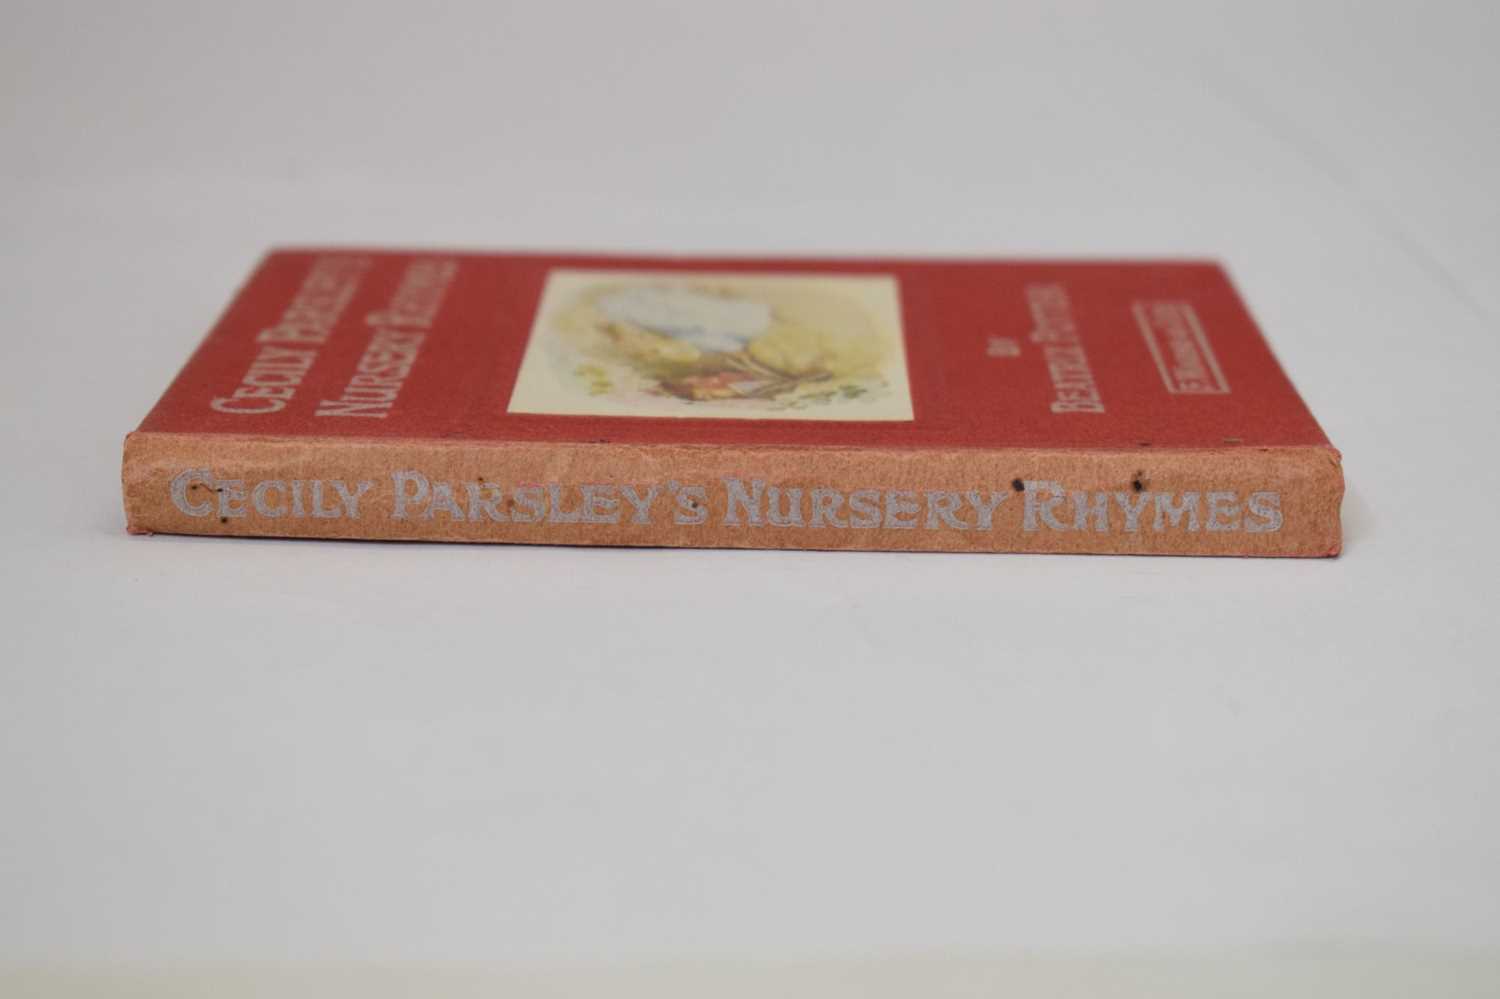 Potter, Beatrix - 'Cecily Parsley's Nursery Rhymes' - First edition - Image 3 of 23